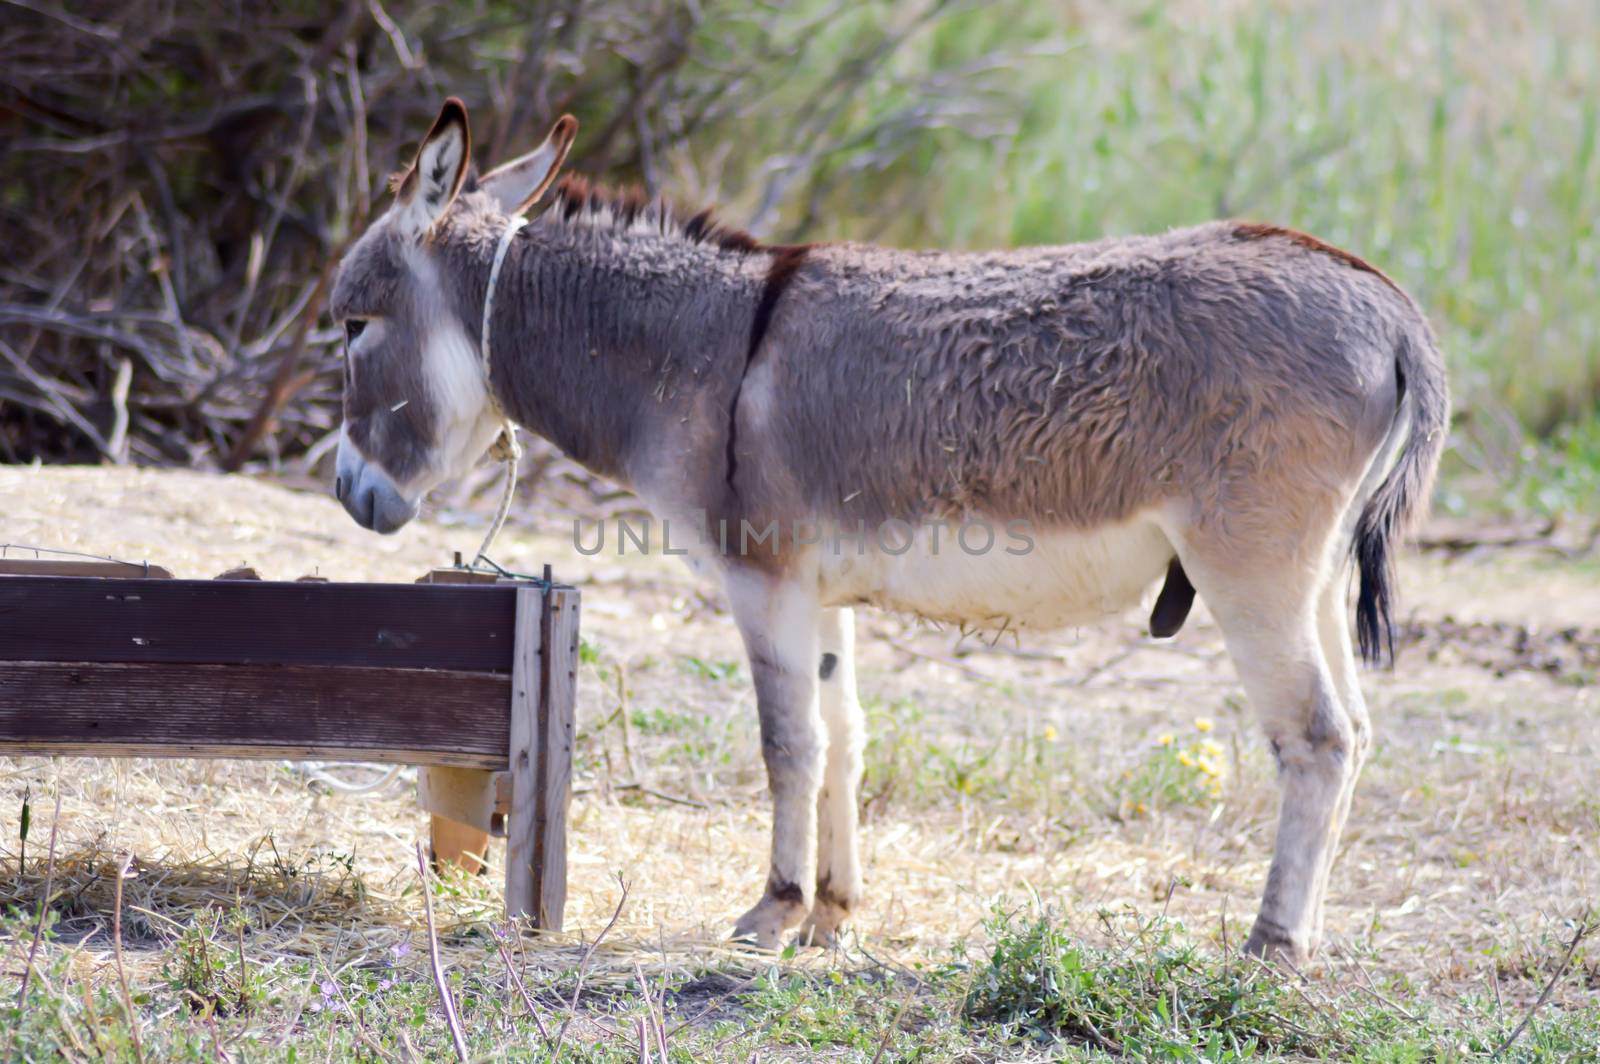 A donkey in front of his trough In a meadow on the island of Crete